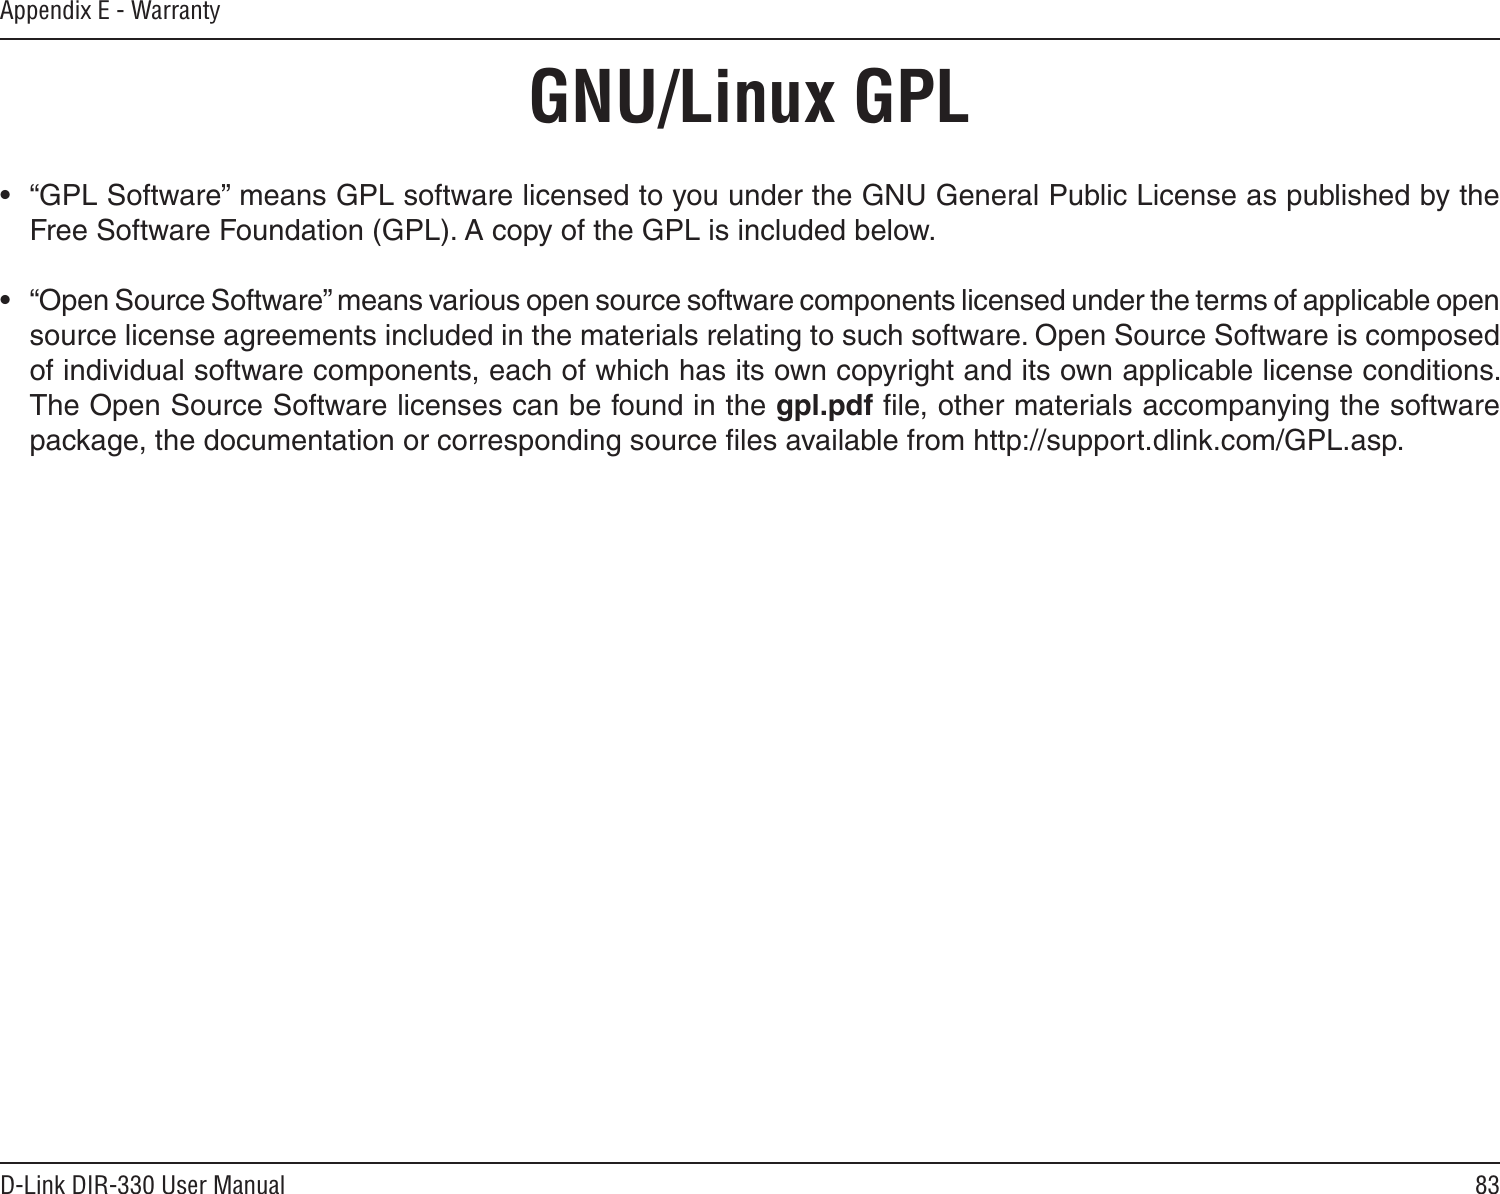 83D-Link DIR-330 User ManualAppendix E - Warranty•  “GPL Software” means GPL software licensed to you under the GNU General Public License as published by the Free Software Foundation (GPL). A copy of the GPL is included below.•  “Open Source Software” means various open source software components licensed under the terms of applicable open source license agreements included in the materials relating to such software. Open Source Software is composed of individual software components, each of which has its own copyright and its own applicable license conditions. The Open Source Software licenses can be found in the gpl.pdf ﬁle, other materials accompanying the software package, the documentation or corresponding source ﬁles available from http://support.dlink.com/GPL.asp.GNU/Linux GPL